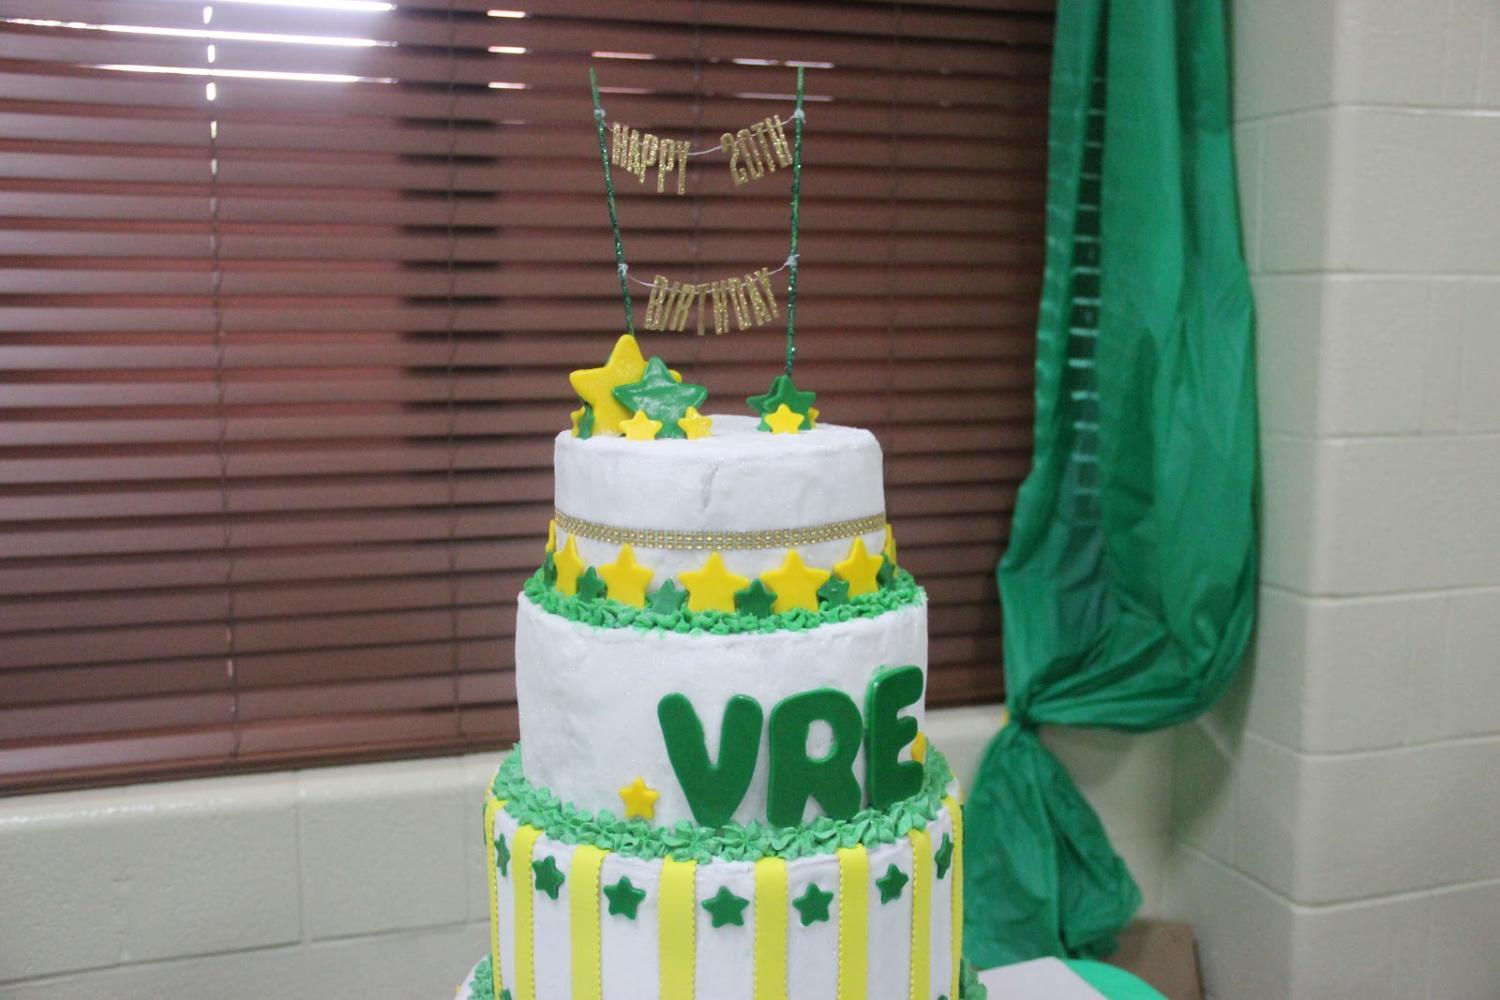 The Valley Ranch Elementary cake was lit and cut later on in the event on Tuesday evening. The event was hosted in celebration of VRE’s 20 years since establishment with a variety of activities to commemorate the occasion.